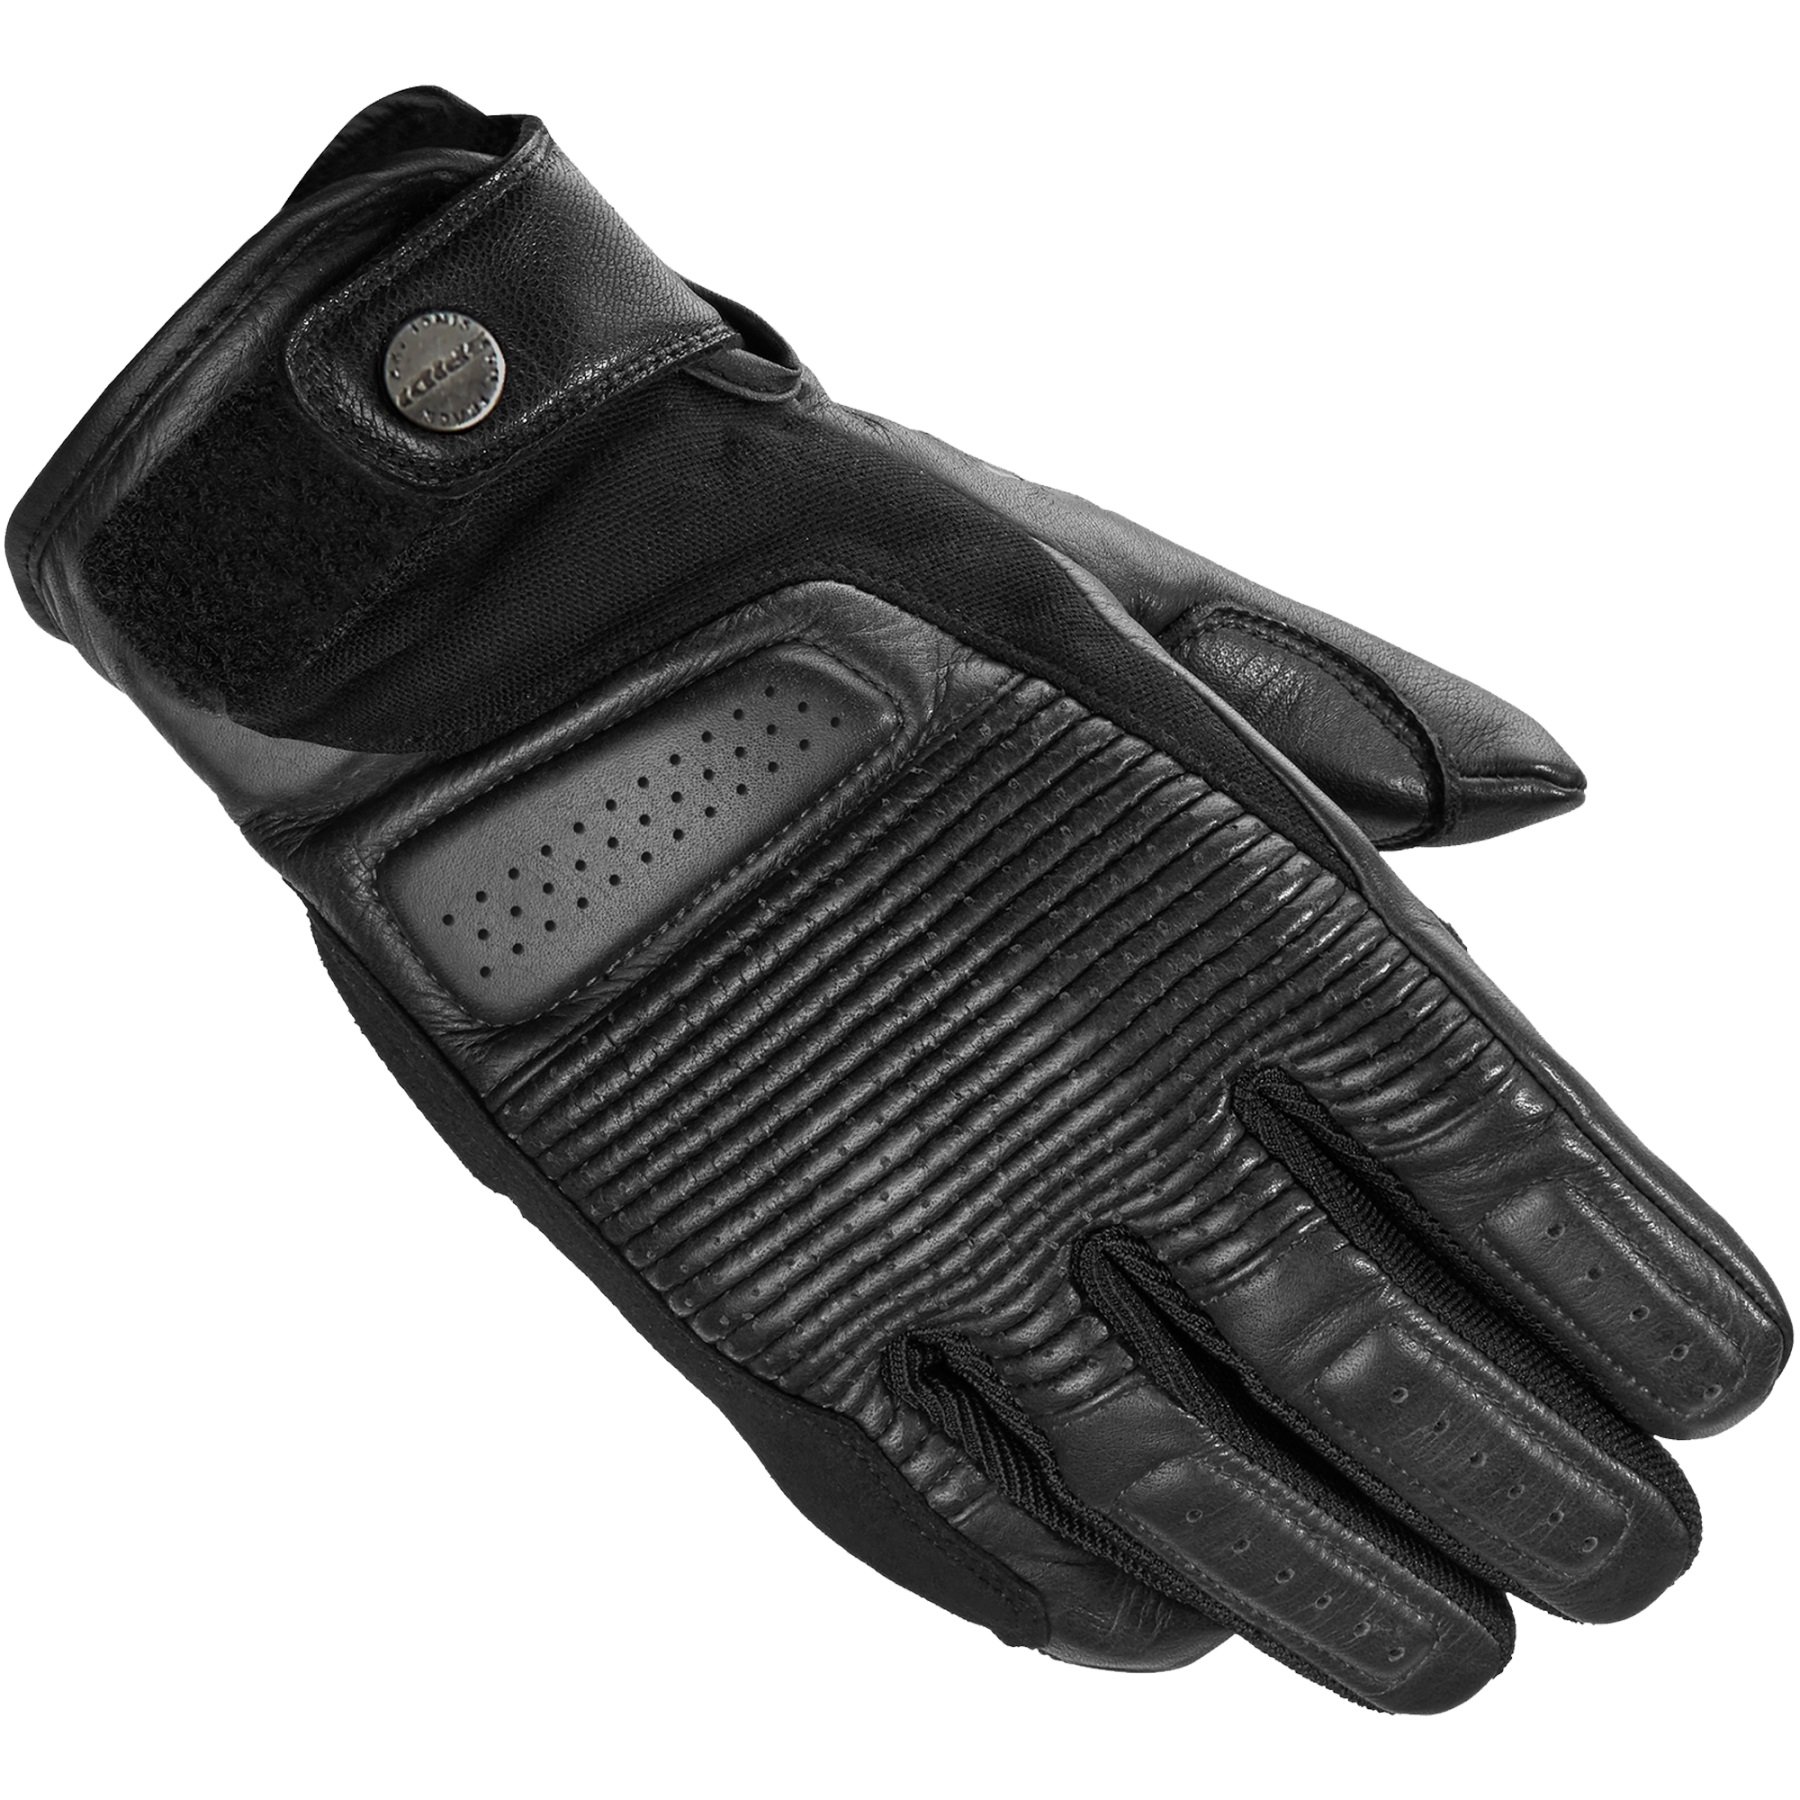 Image of Spidi Clubber Black Motorcycle Gloves Talla L